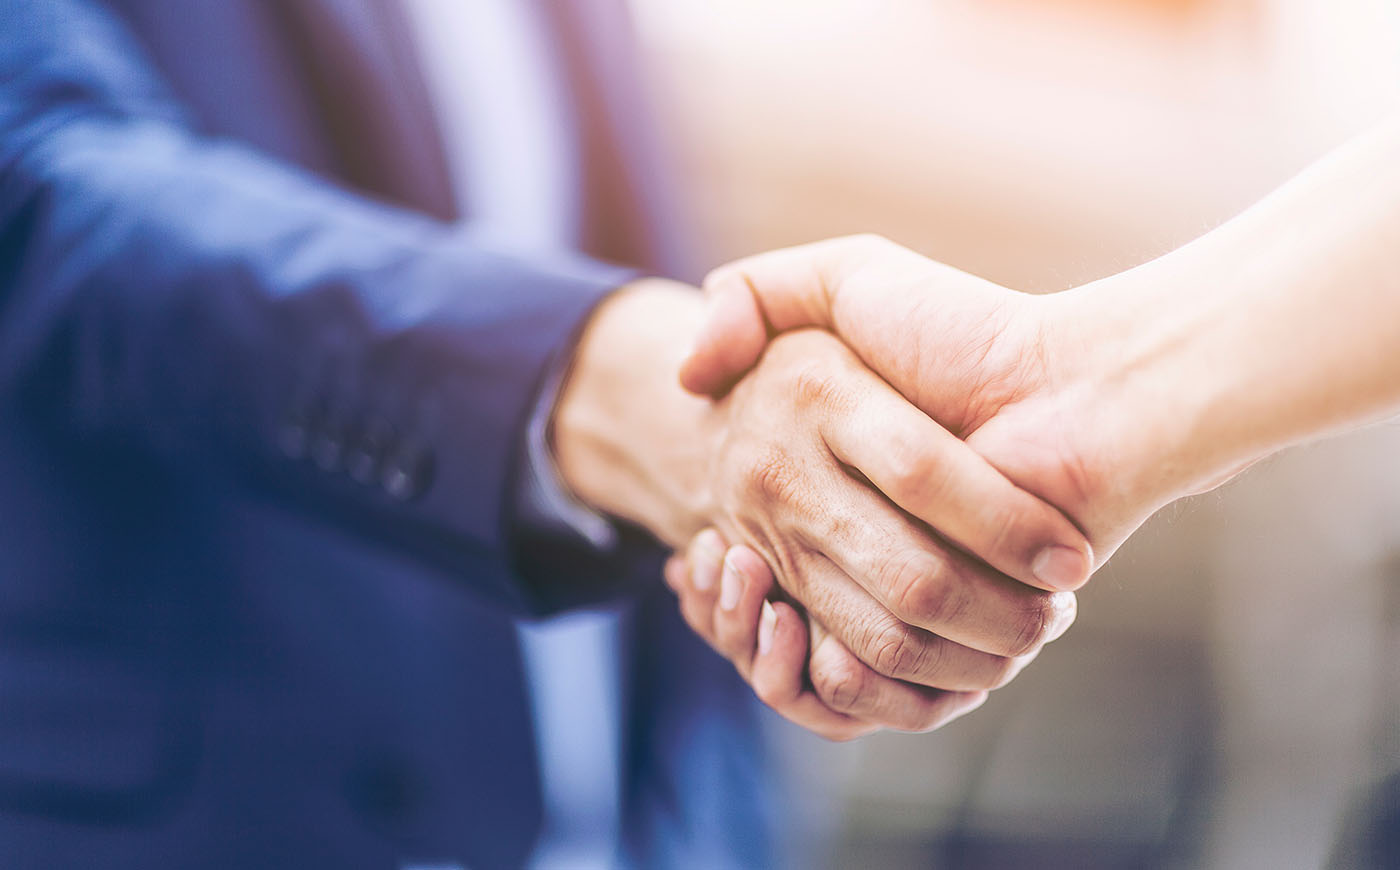 Close up of a handshake between two people